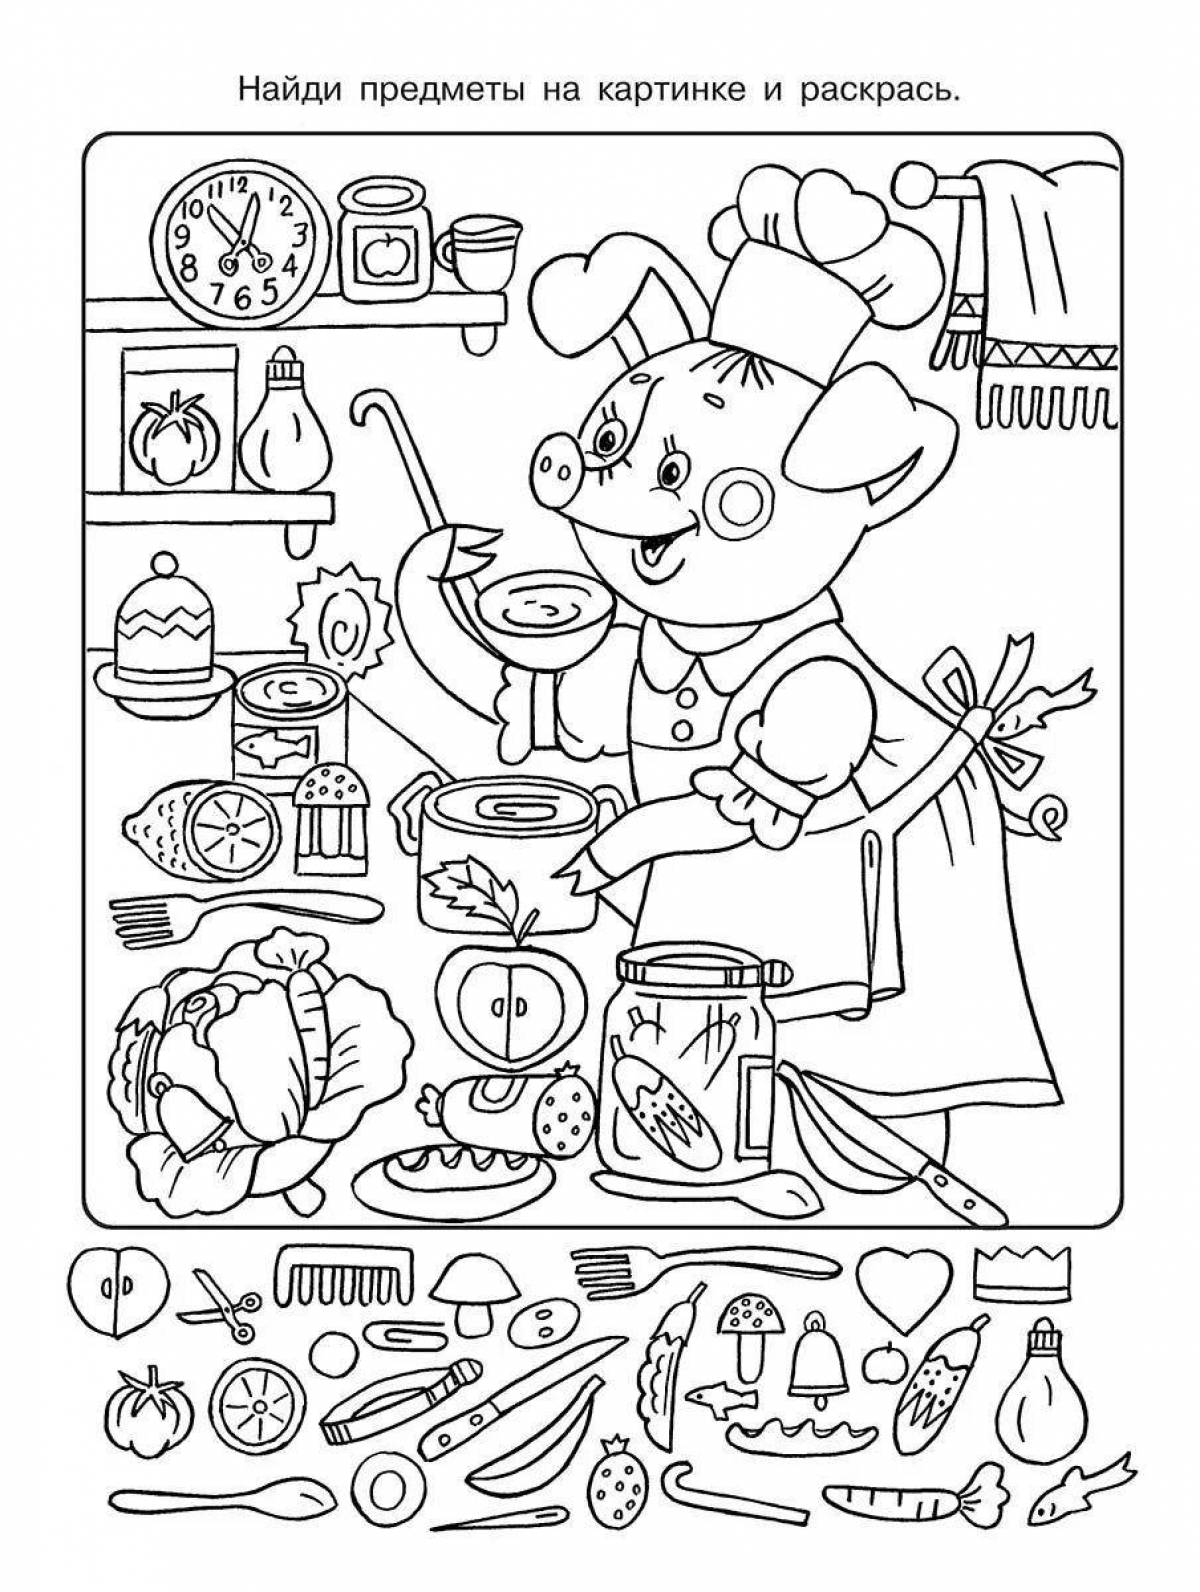 Attention stimulating coloring book